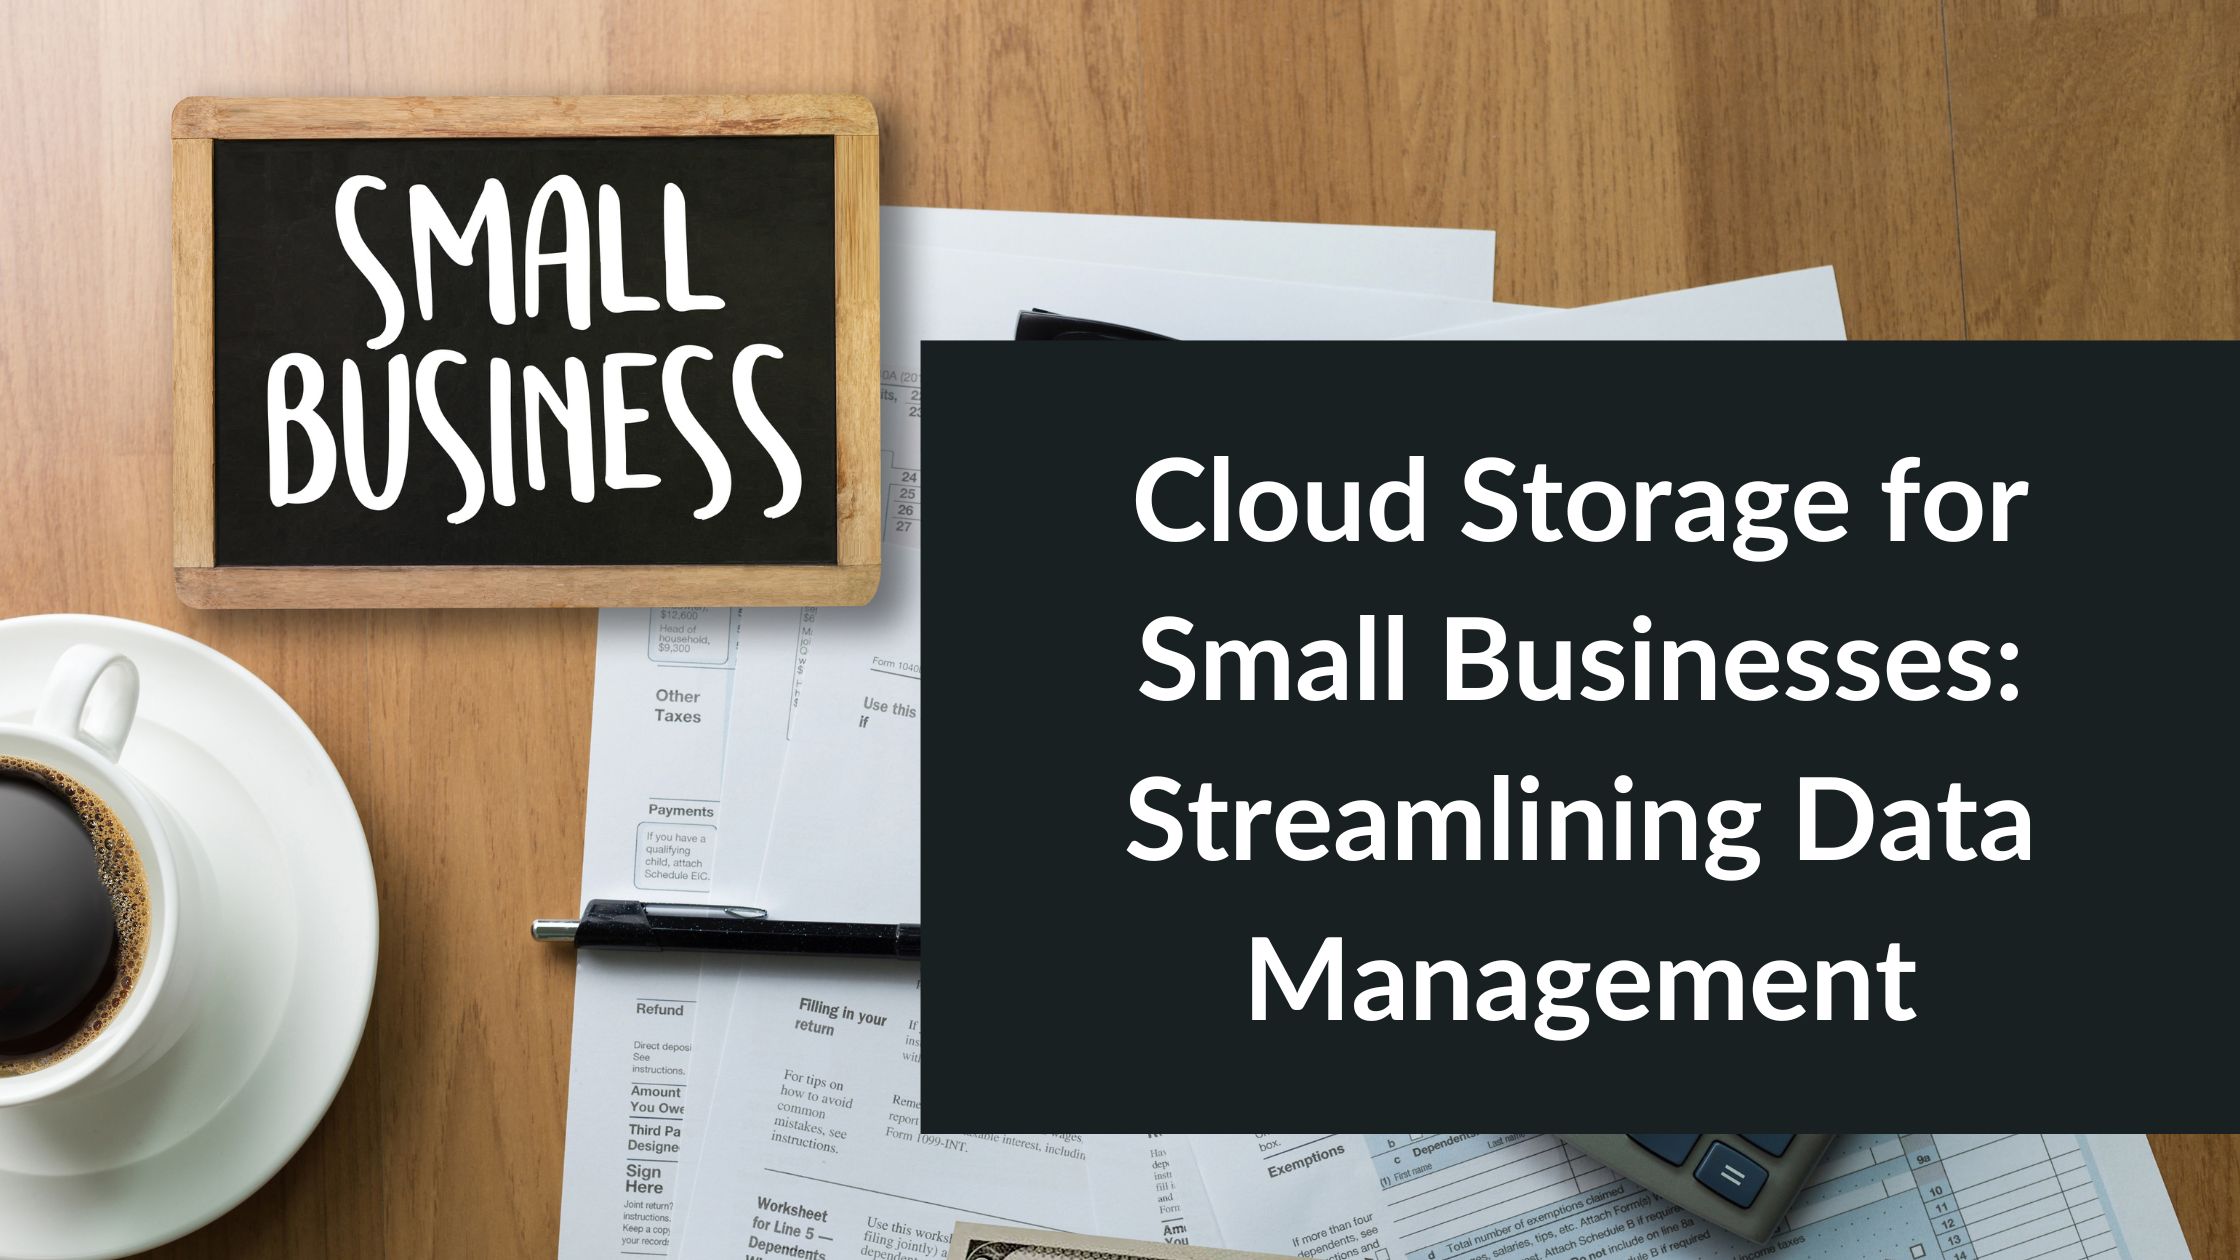 Cloud Storage for Small Businesses: Streamlining Data Management